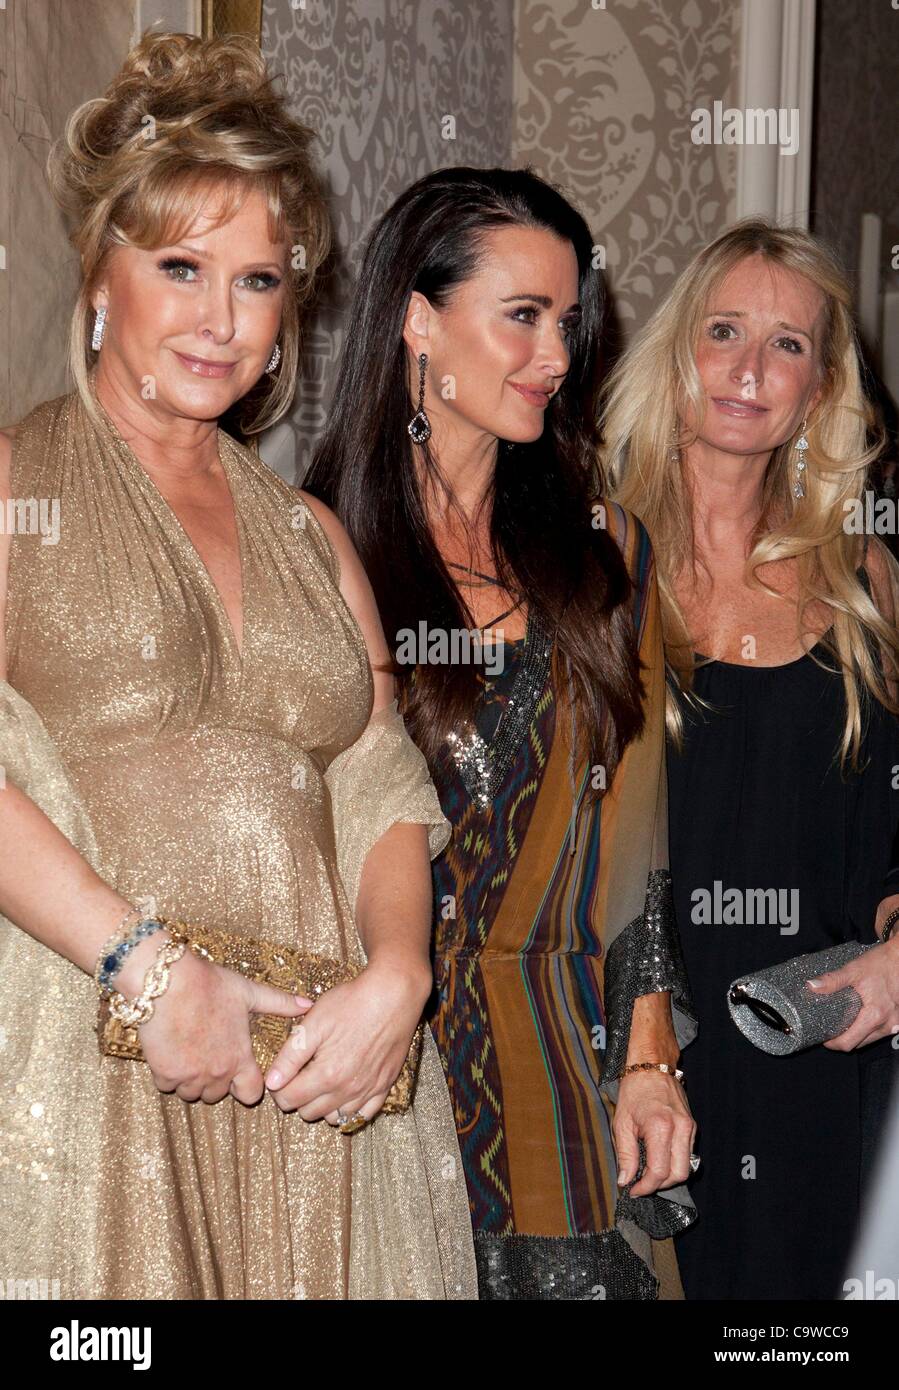 Kathy Hilton, Kyle Richards, Kim Hilton at arrivals for QVC Buzz on the Red Carpet Oscar Party, Four Seasons Hotel, Los Angeles, CA February 23, 2012. Photo By: Emiley Schweich/Everett Collection Stock Photo